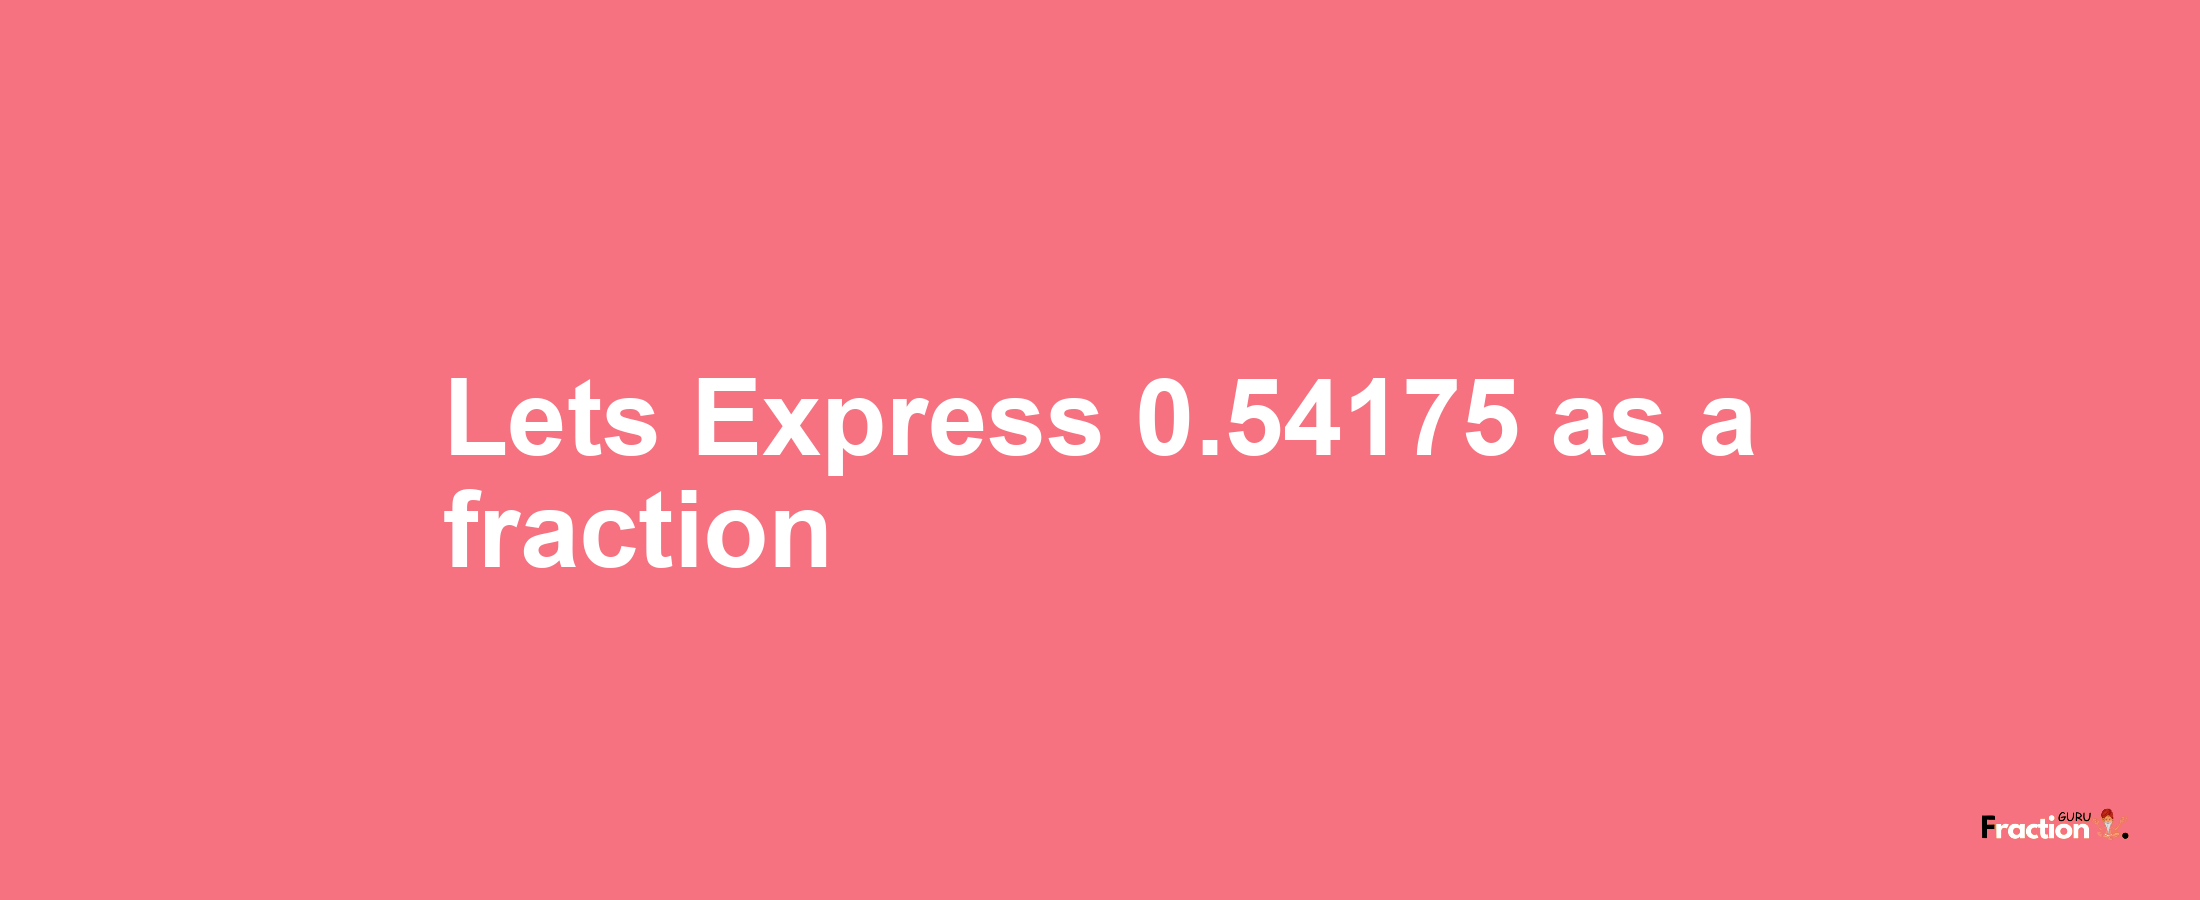 Lets Express 0.54175 as afraction